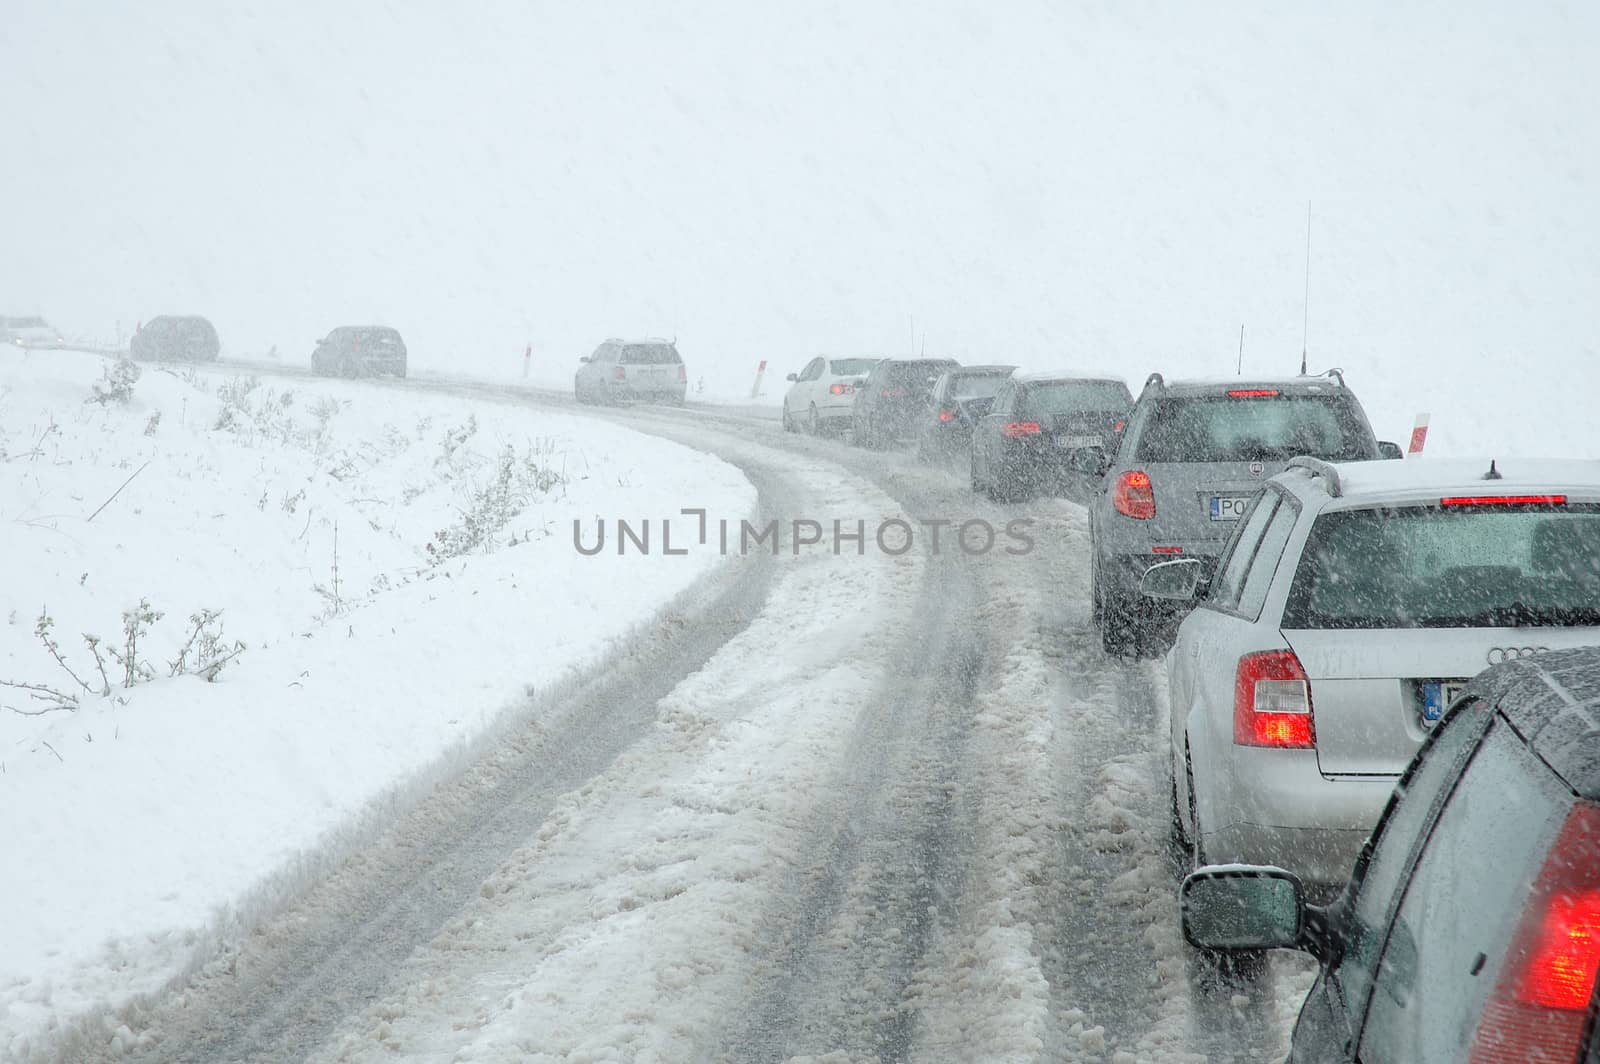 Traffic jam on mountain road caused by heavy snowfall on 03.05.2011 nearby Jelenia G�ra Poland